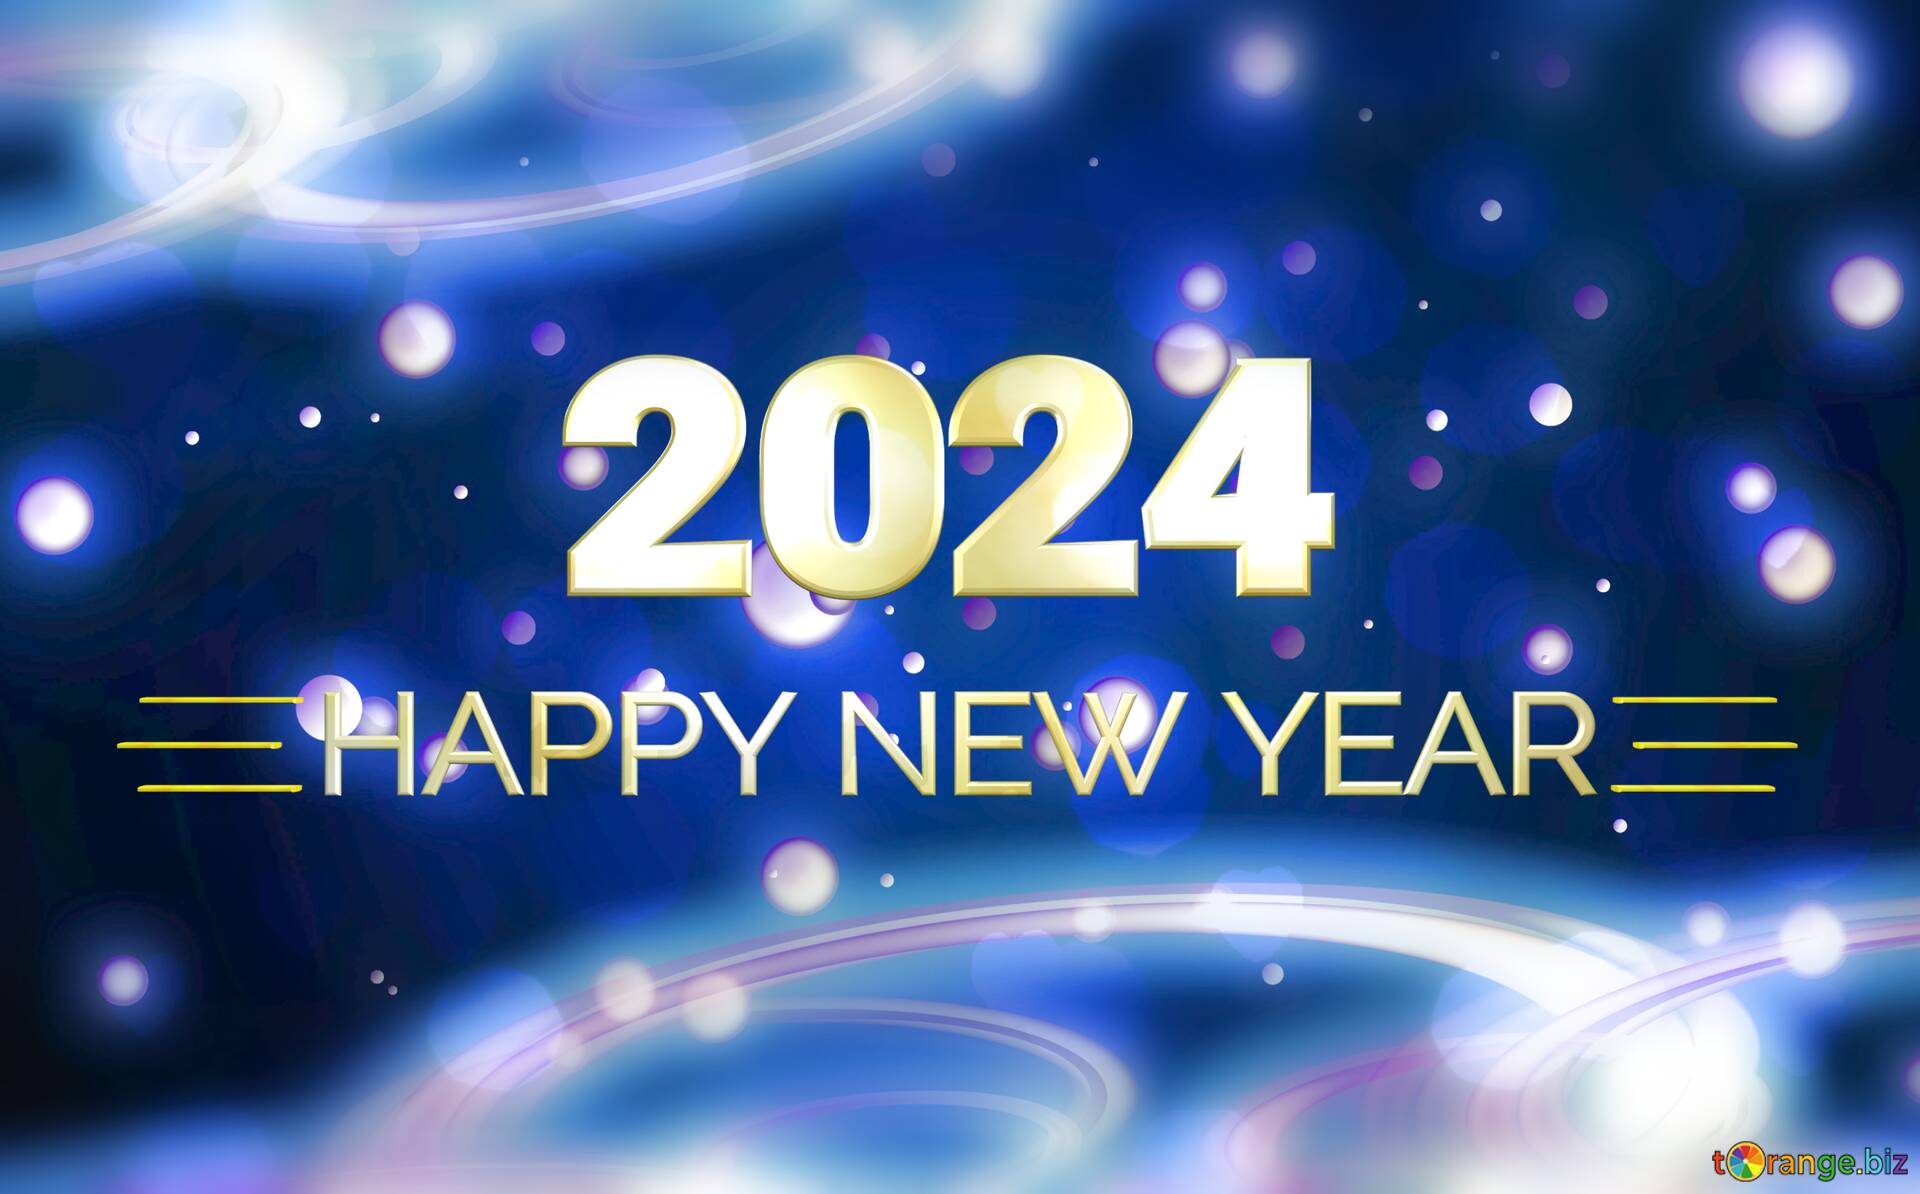 Happy new year 2024 Best images. №229425